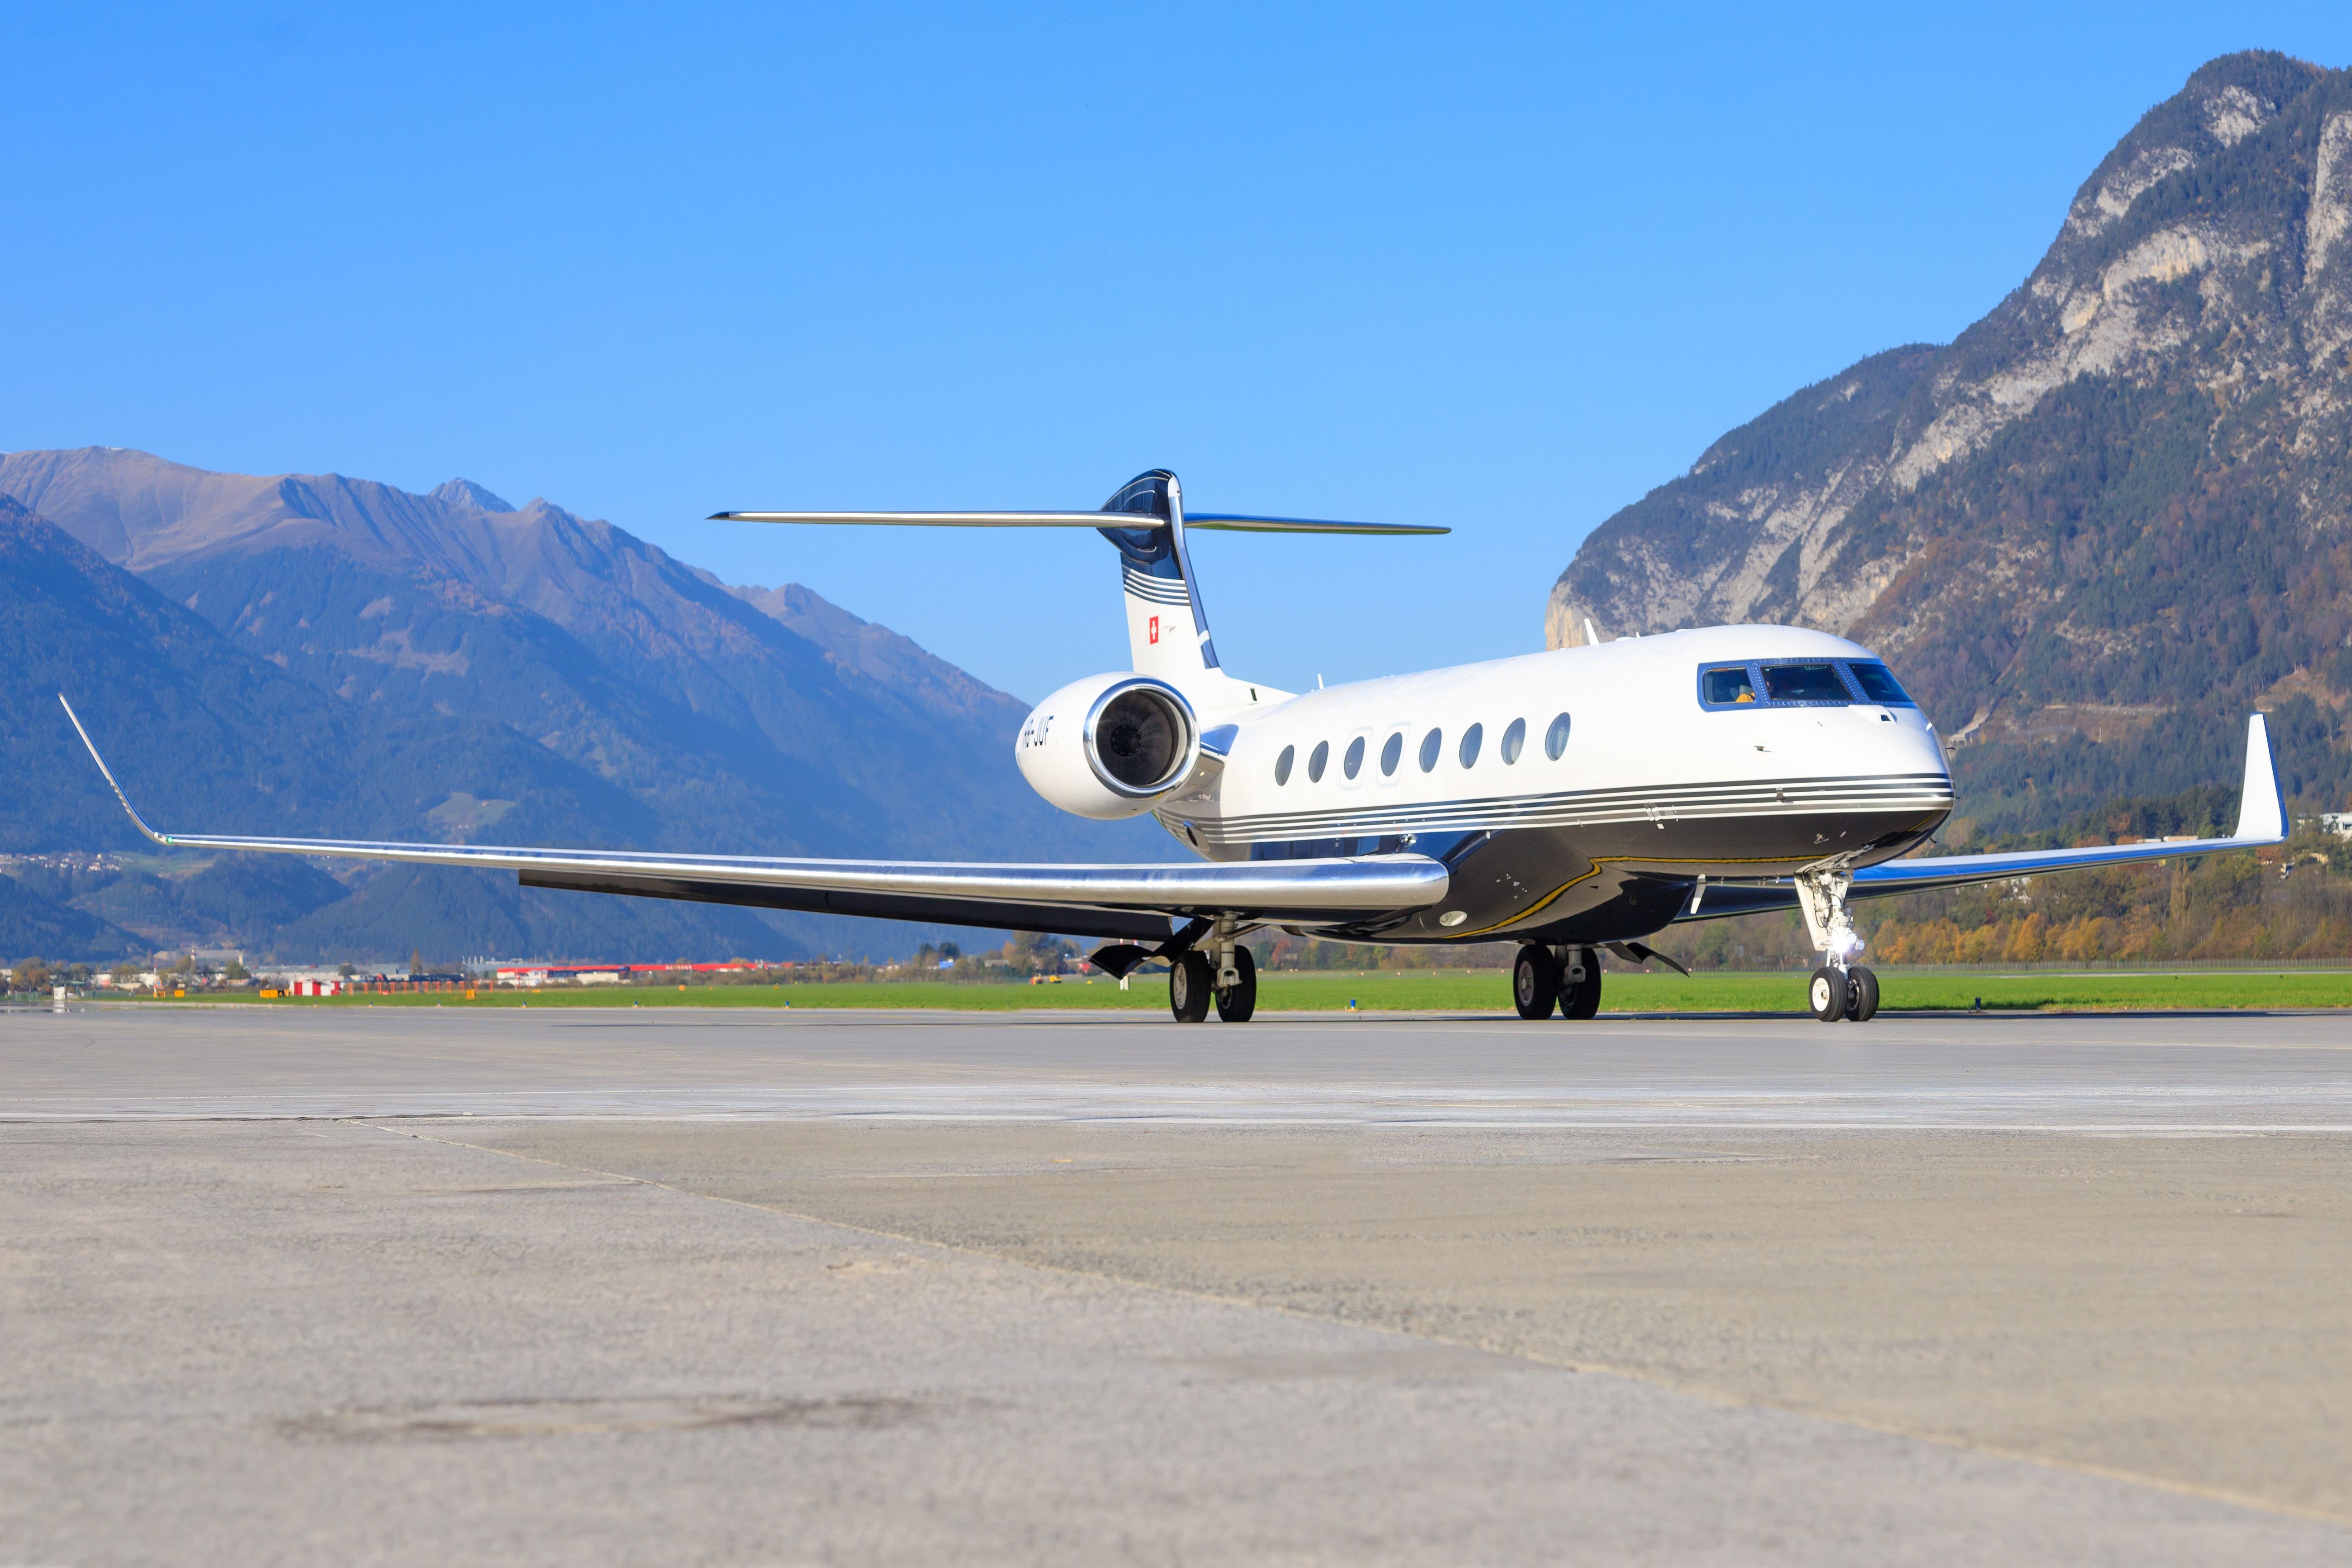 A Gulfstream G650 on an airport apron with mountains in the background.